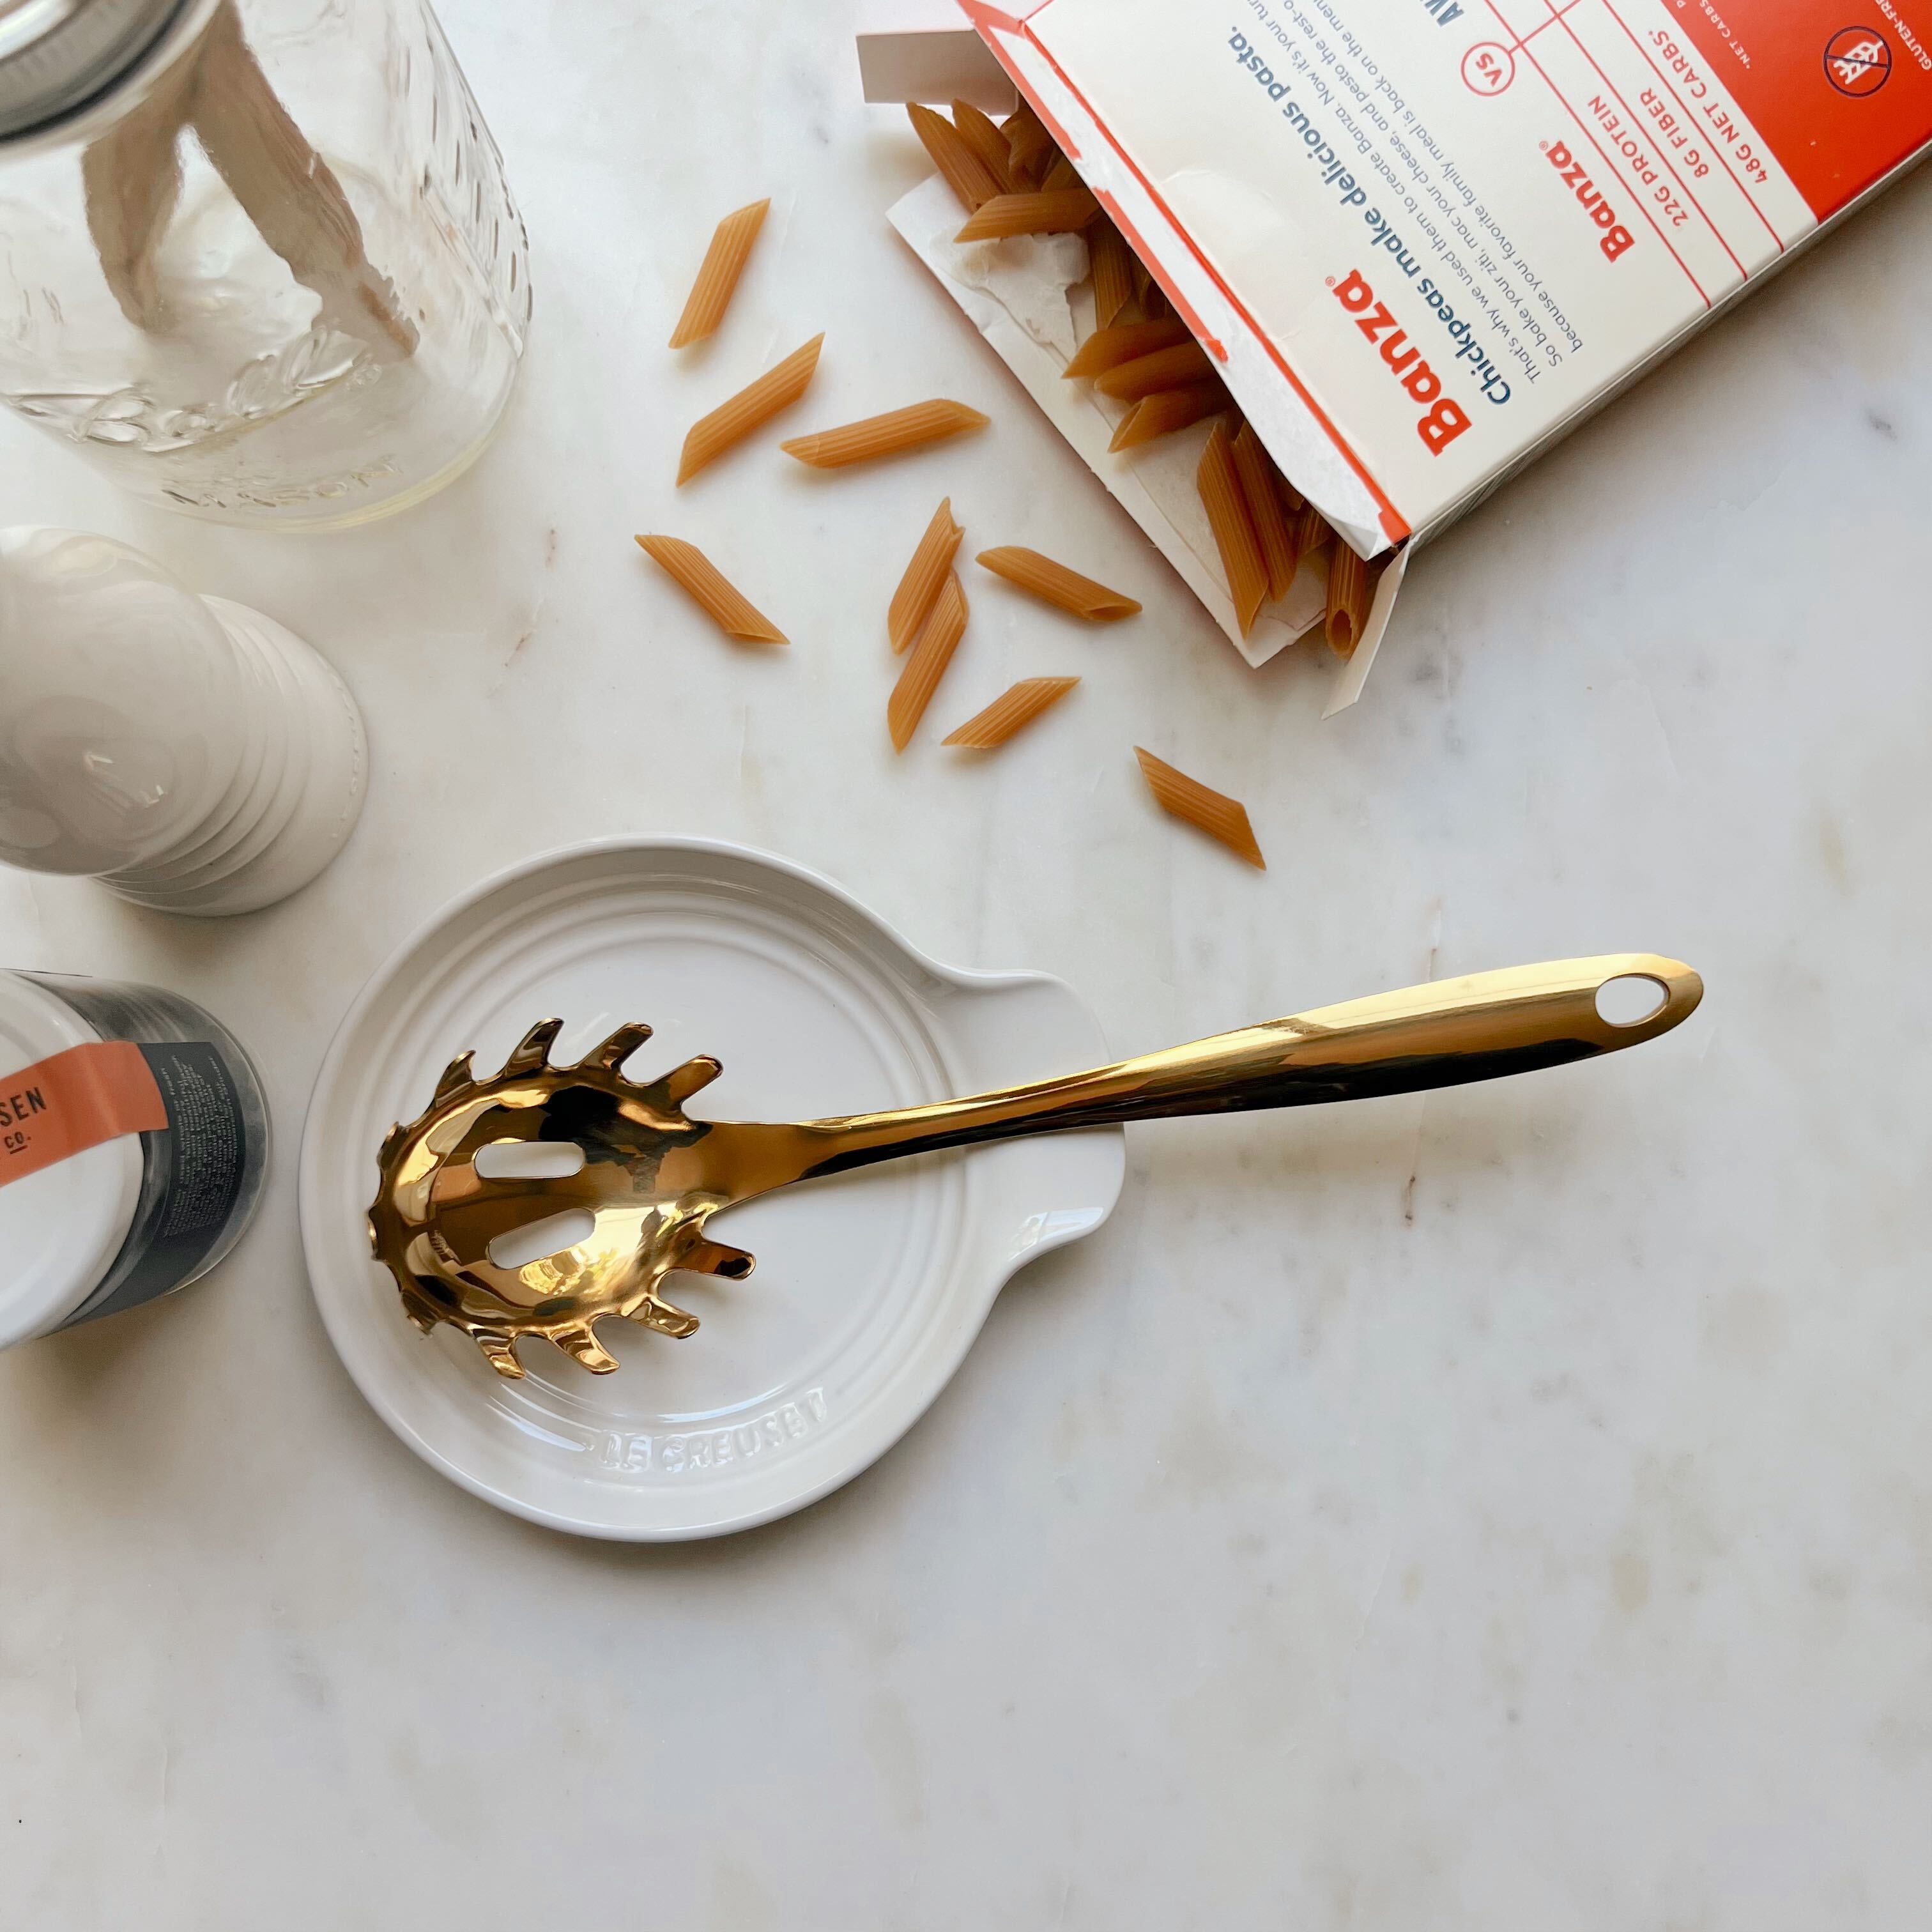 A gold pasta spoon laying on a white ceramic Le Creuset spoon rest next to Banza pasta noodles spilling out of their package on a white marble counter.